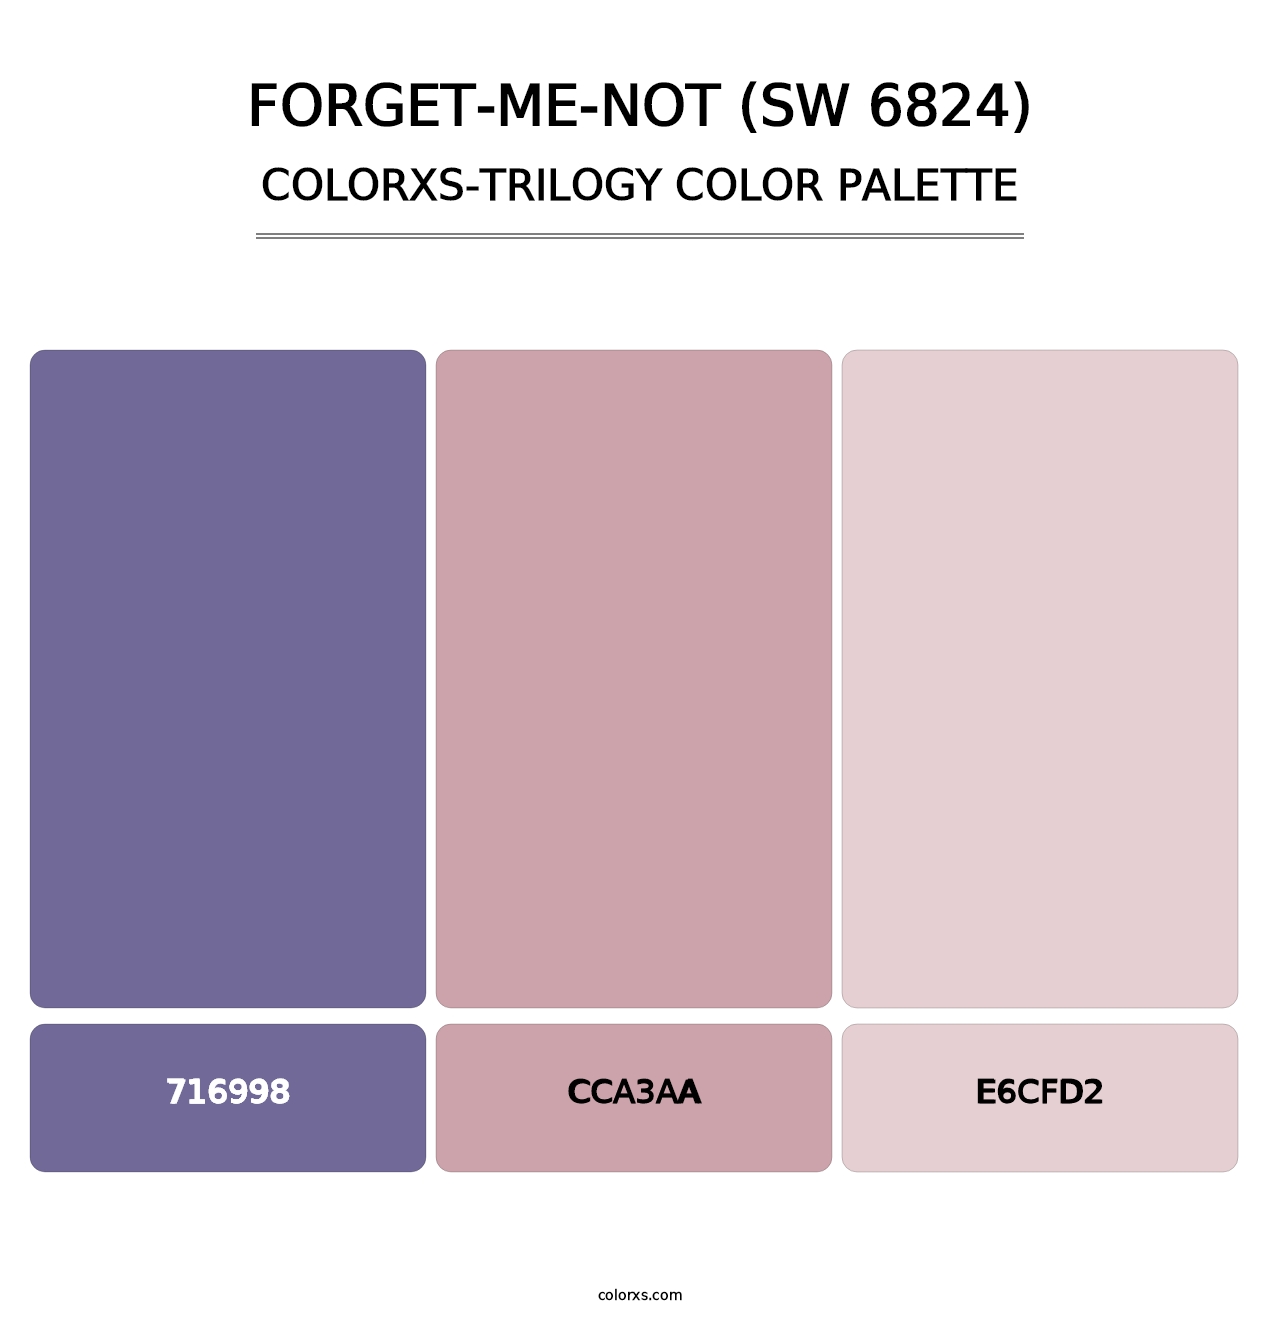 Forget-Me-Not (SW 6824) - Colorxs Trilogy Palette